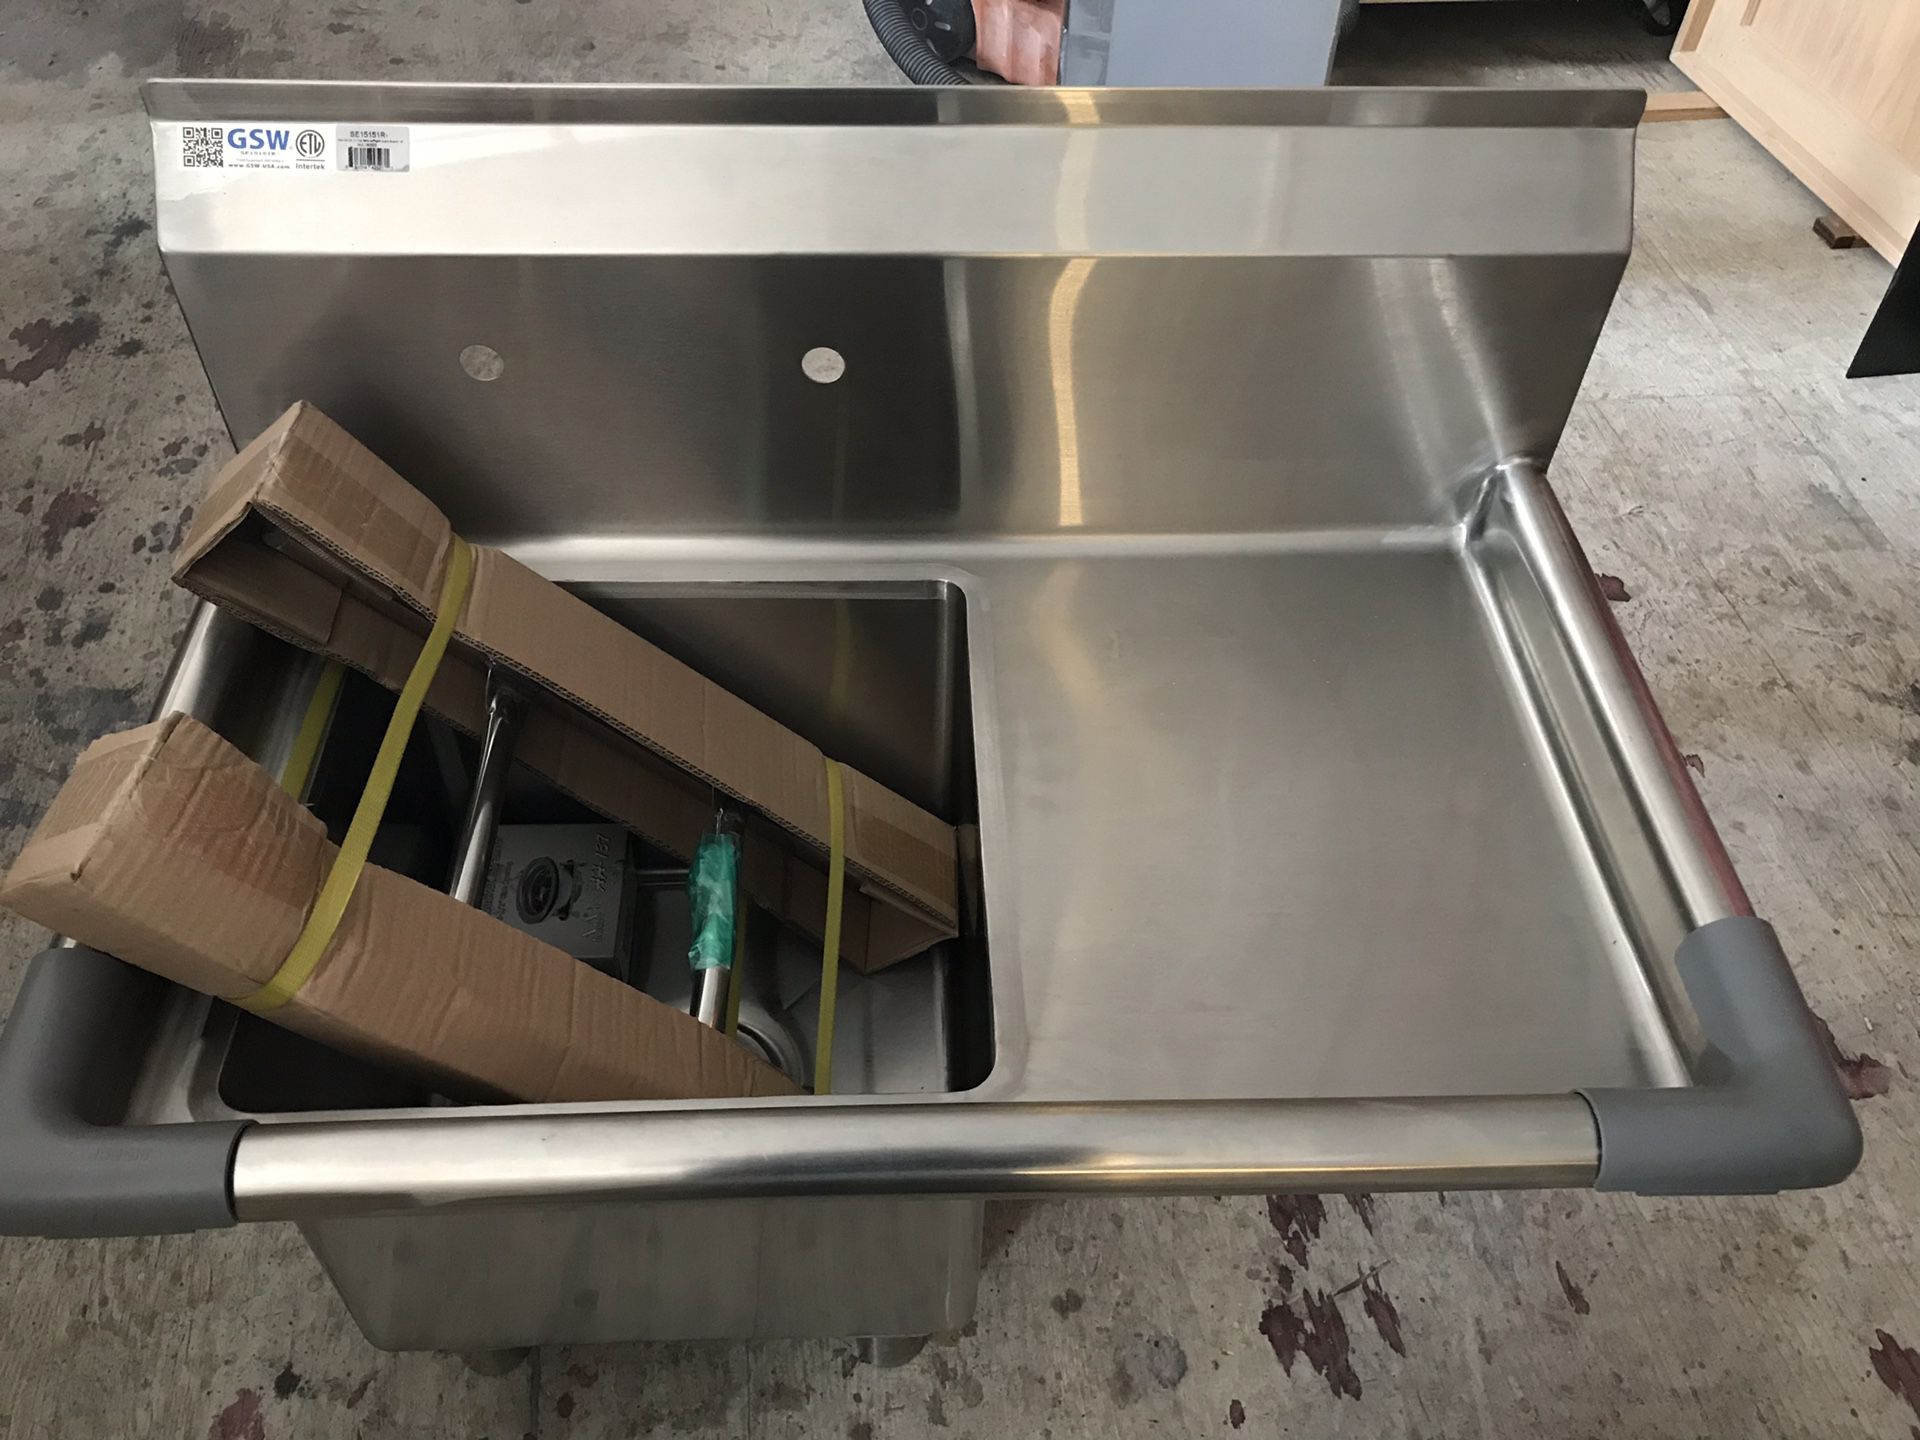 1 compartment stainless steel commercial food preparation sink.